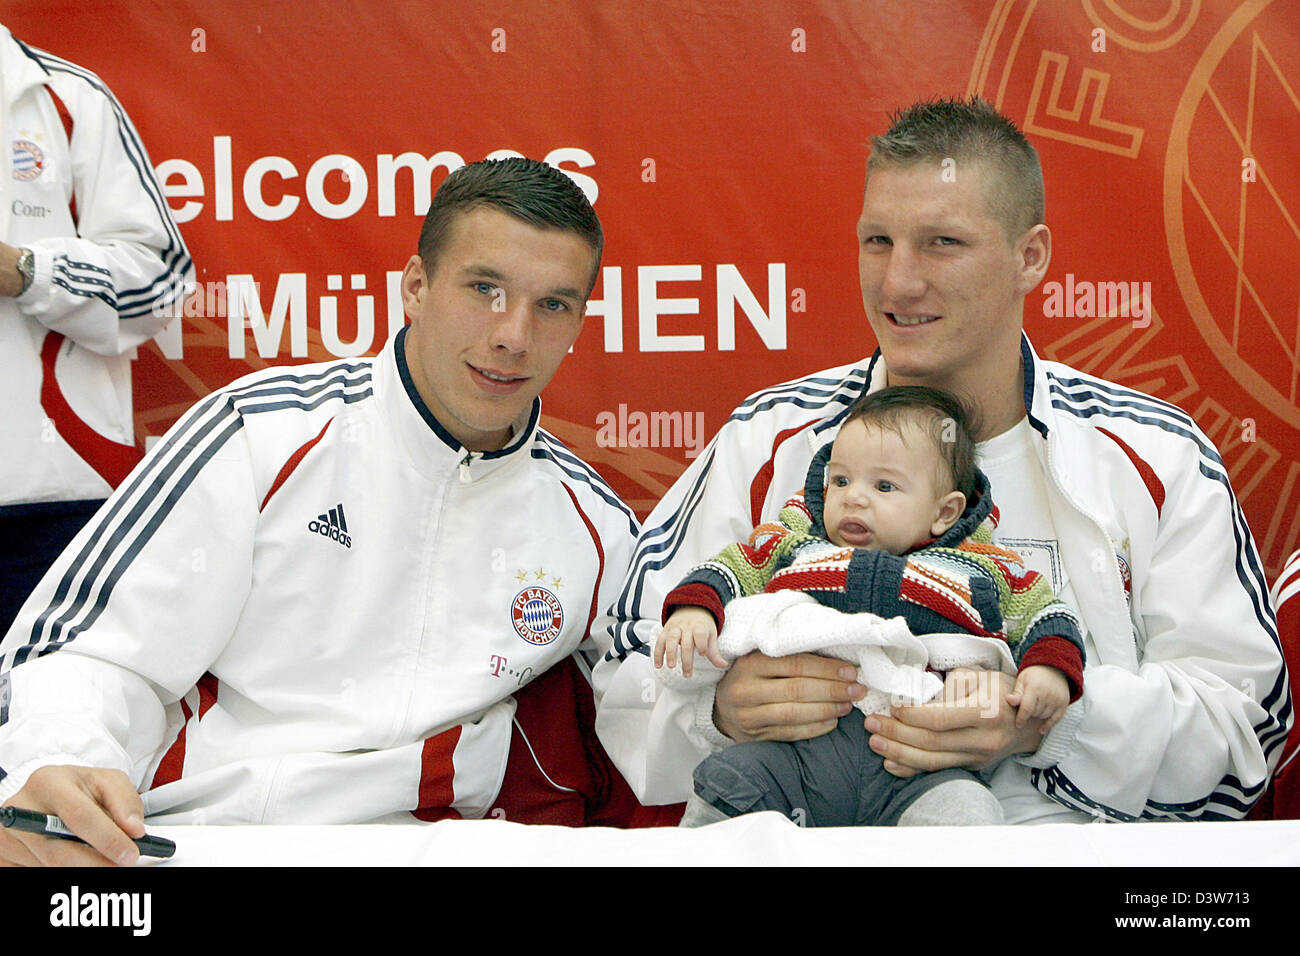 Lukas Podolski (L) and Bastian Schweinsteiger of FC Bayern Munich pose with a fan's child during an autograph session at an adidas store in Dubai, United Arab Emirates, Thursday 11 January 2207. Photo: Daniel Karmann Stock Photo